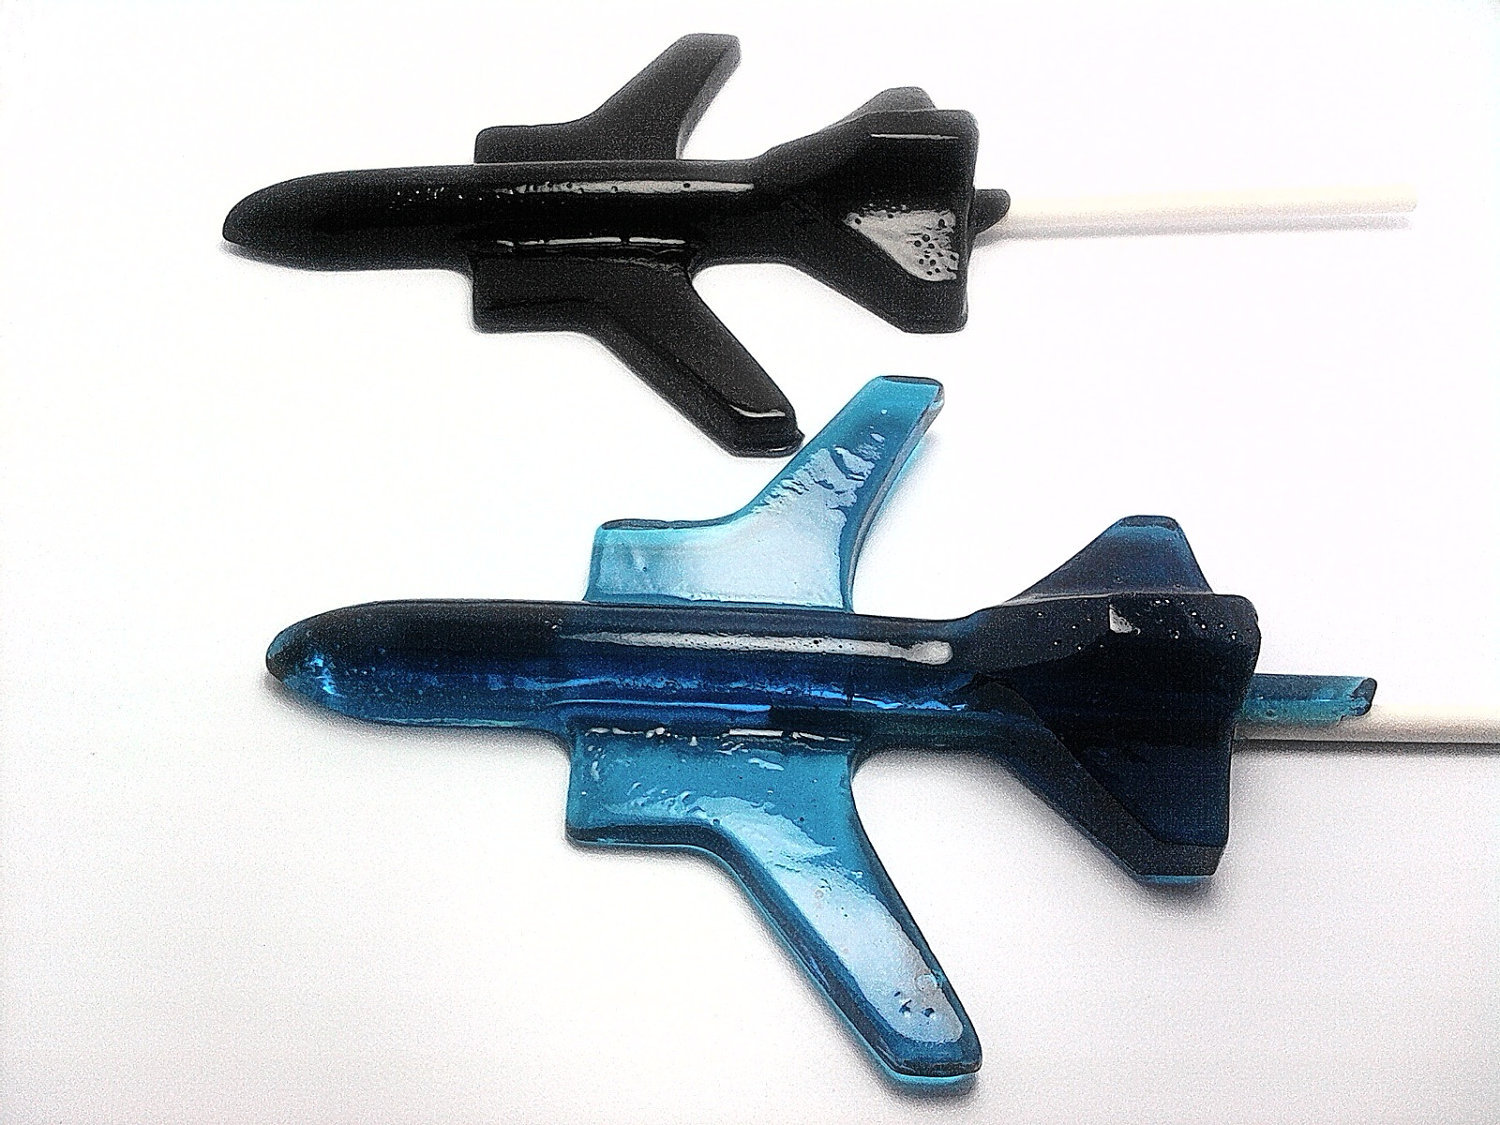 12 LARGE JET PLANE Lollipops - Pick Any Color and Flavor - $18.99